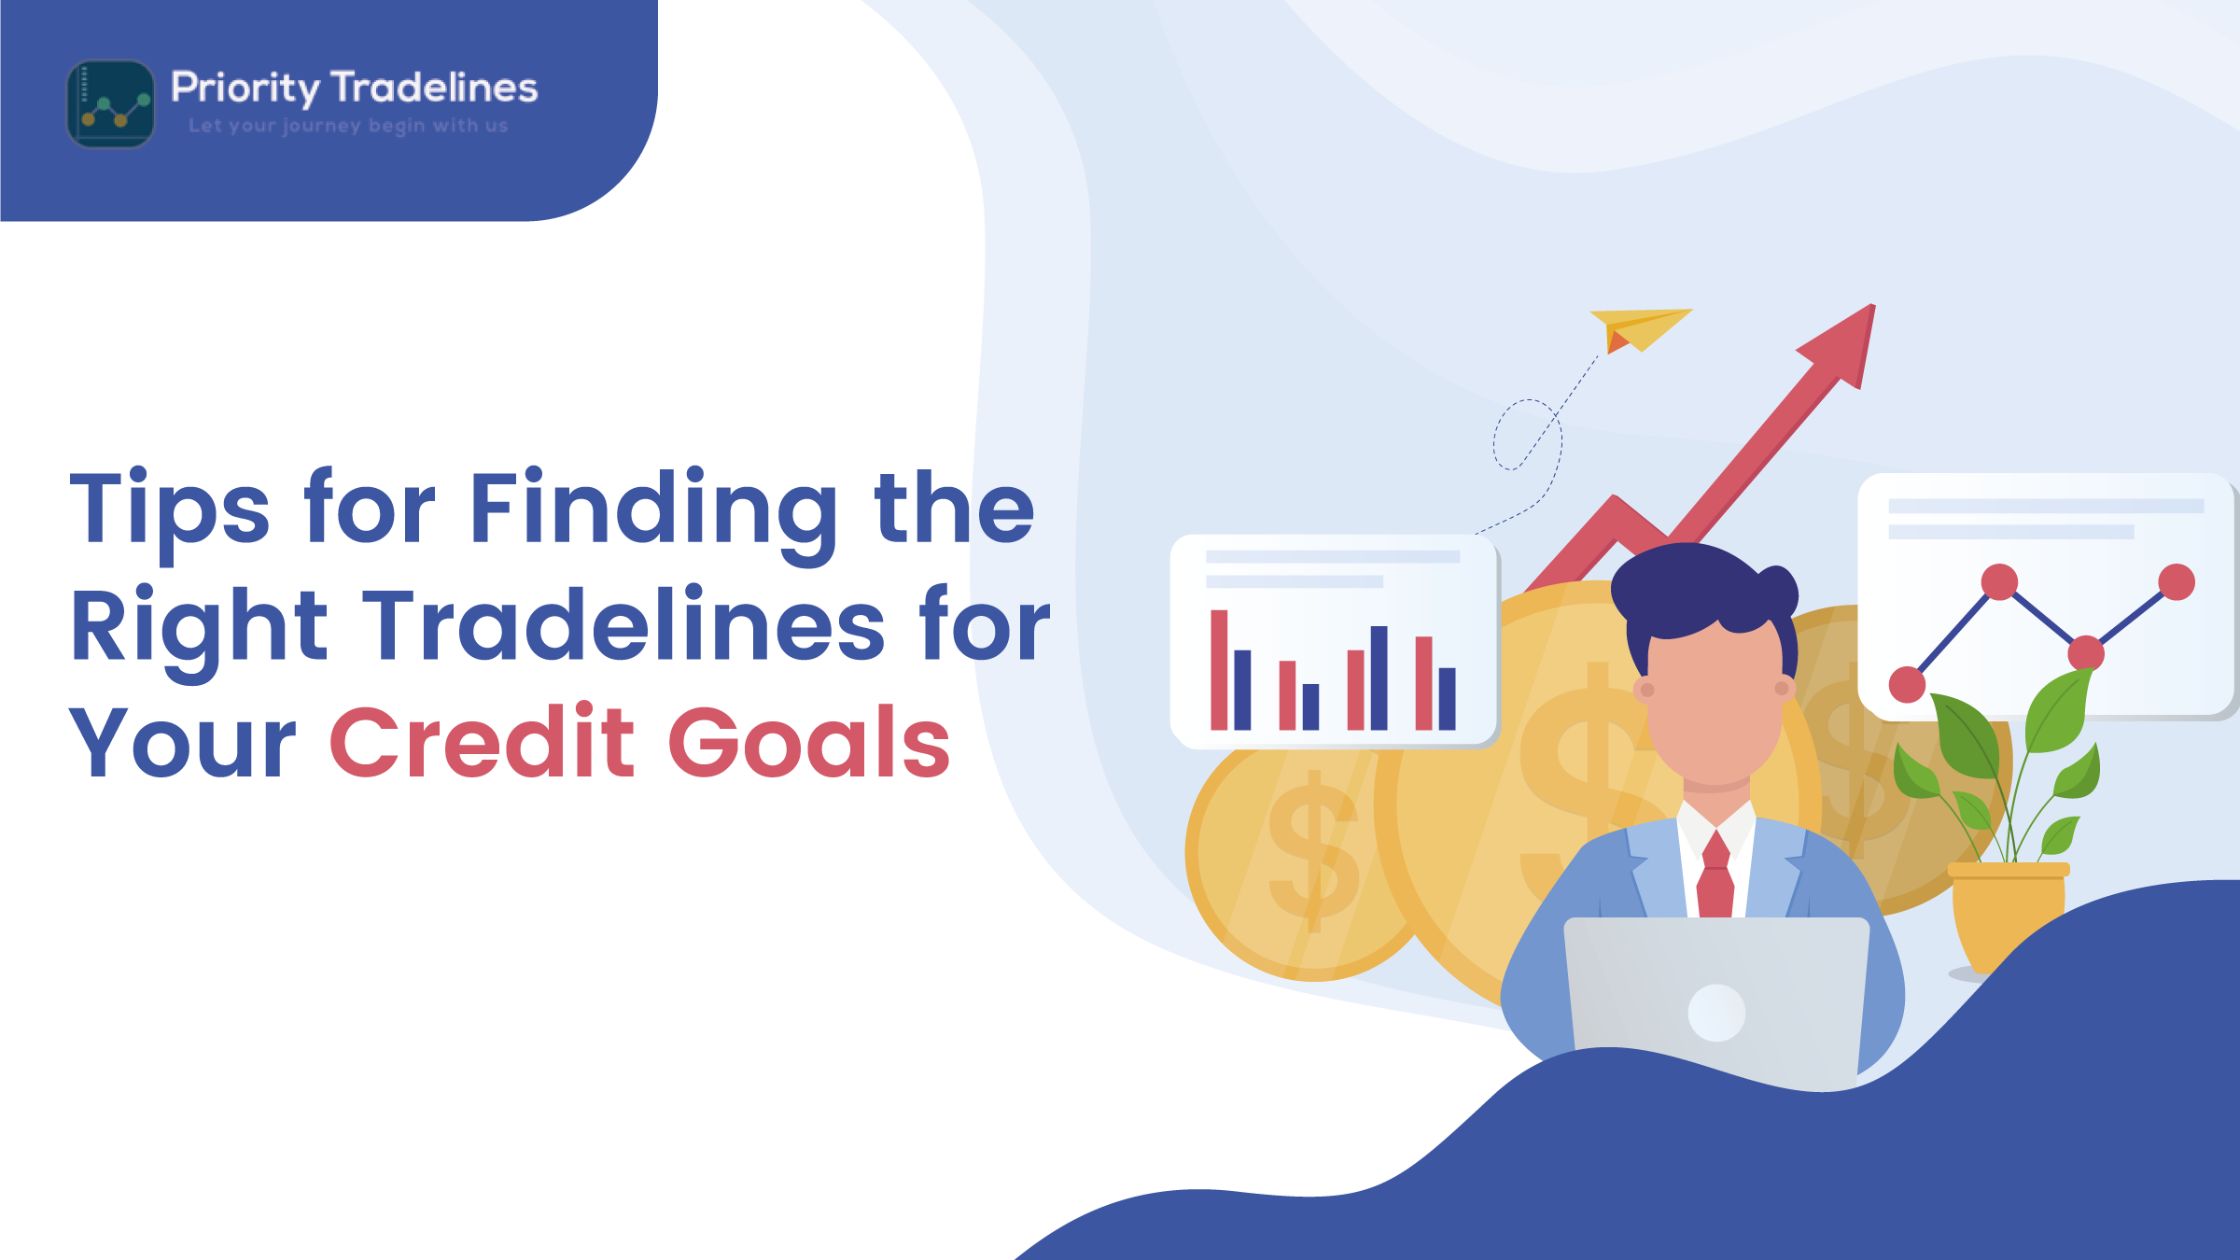 Tips for Finding the Right Tradelines for Your Credit Goals